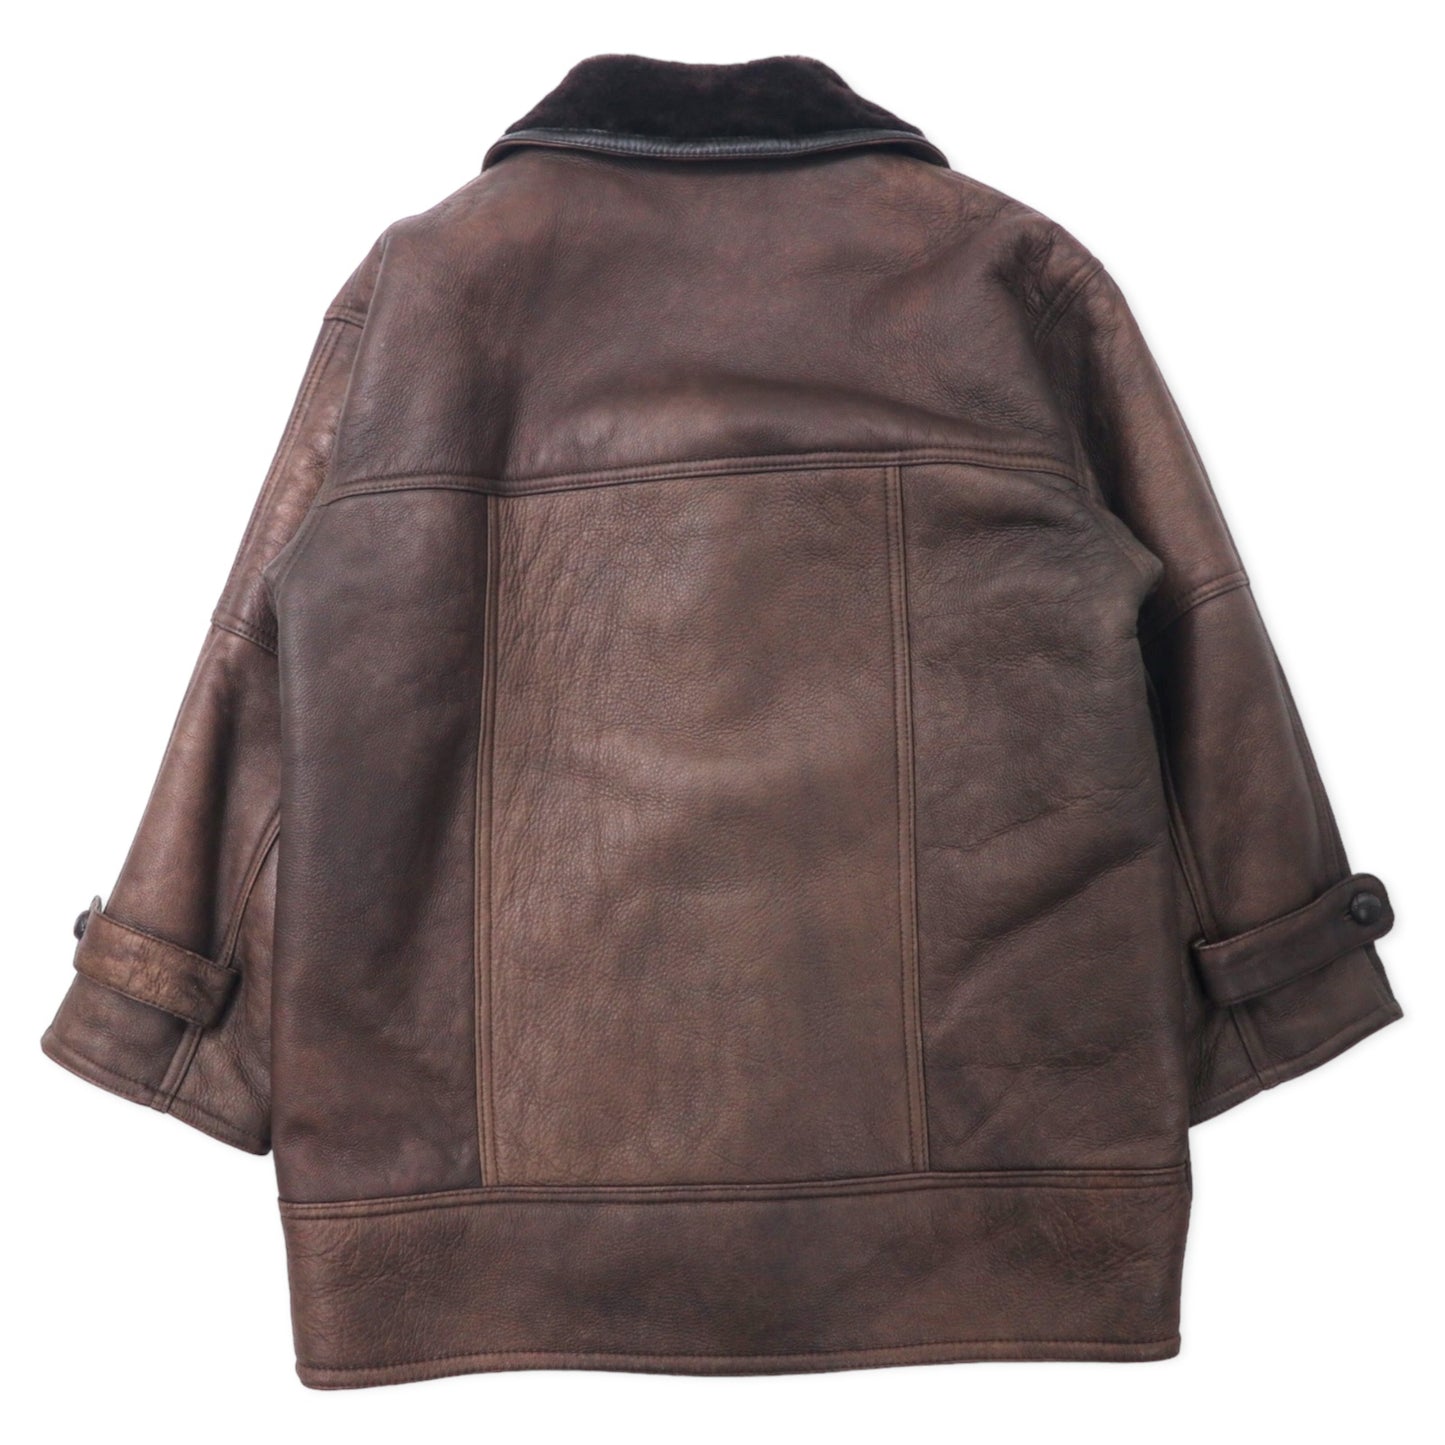 B Spare Show COLLAR Mouton Jacket Lunch COAT L Brown Lamb Leather 